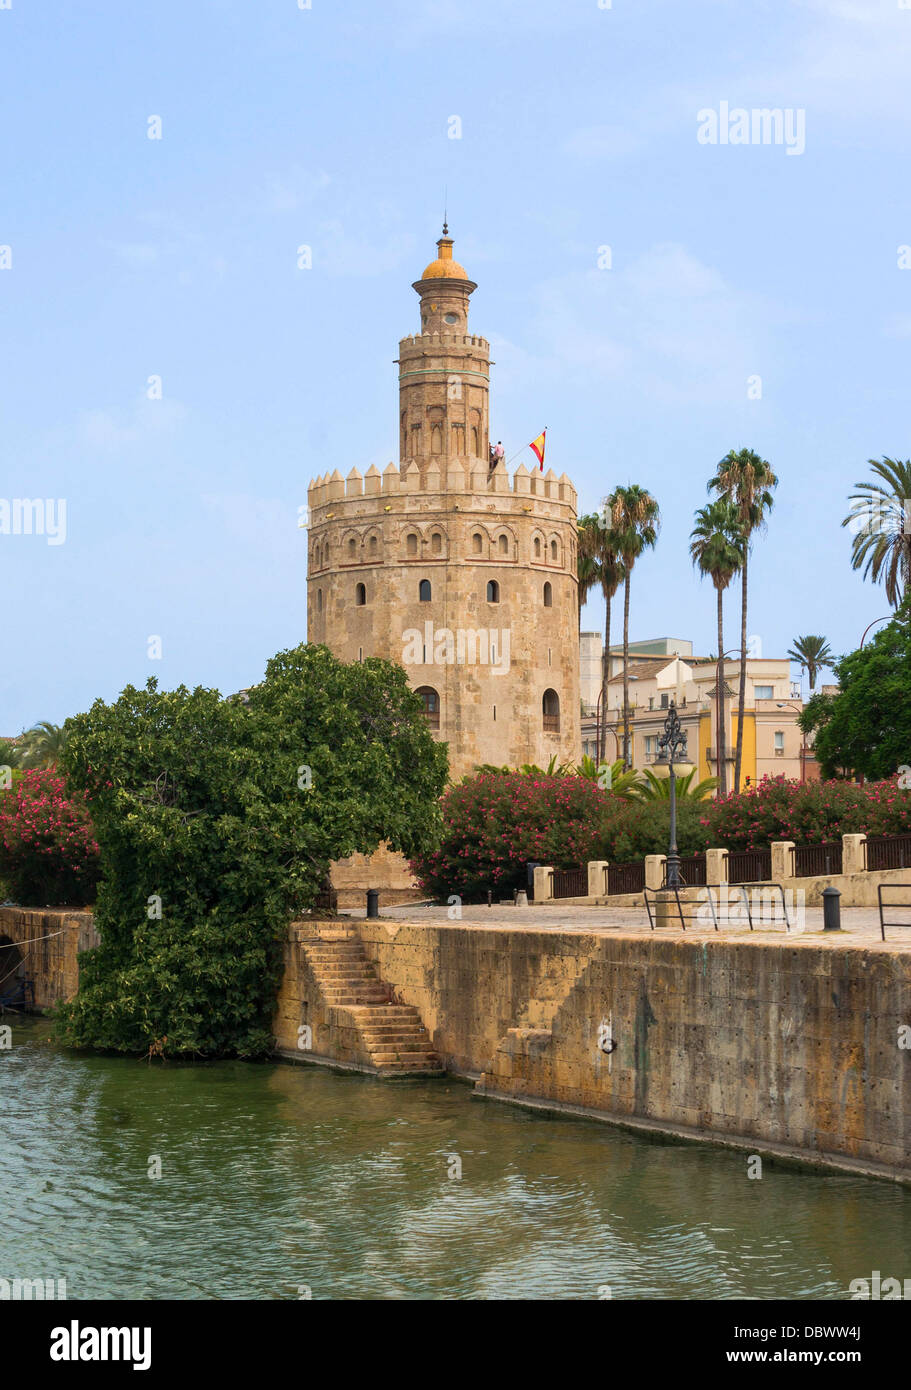 The Tower of Gold (Torre del Oro) as seen from a boat on the Guadalquivir river, Seville, Spain. Stock Photo